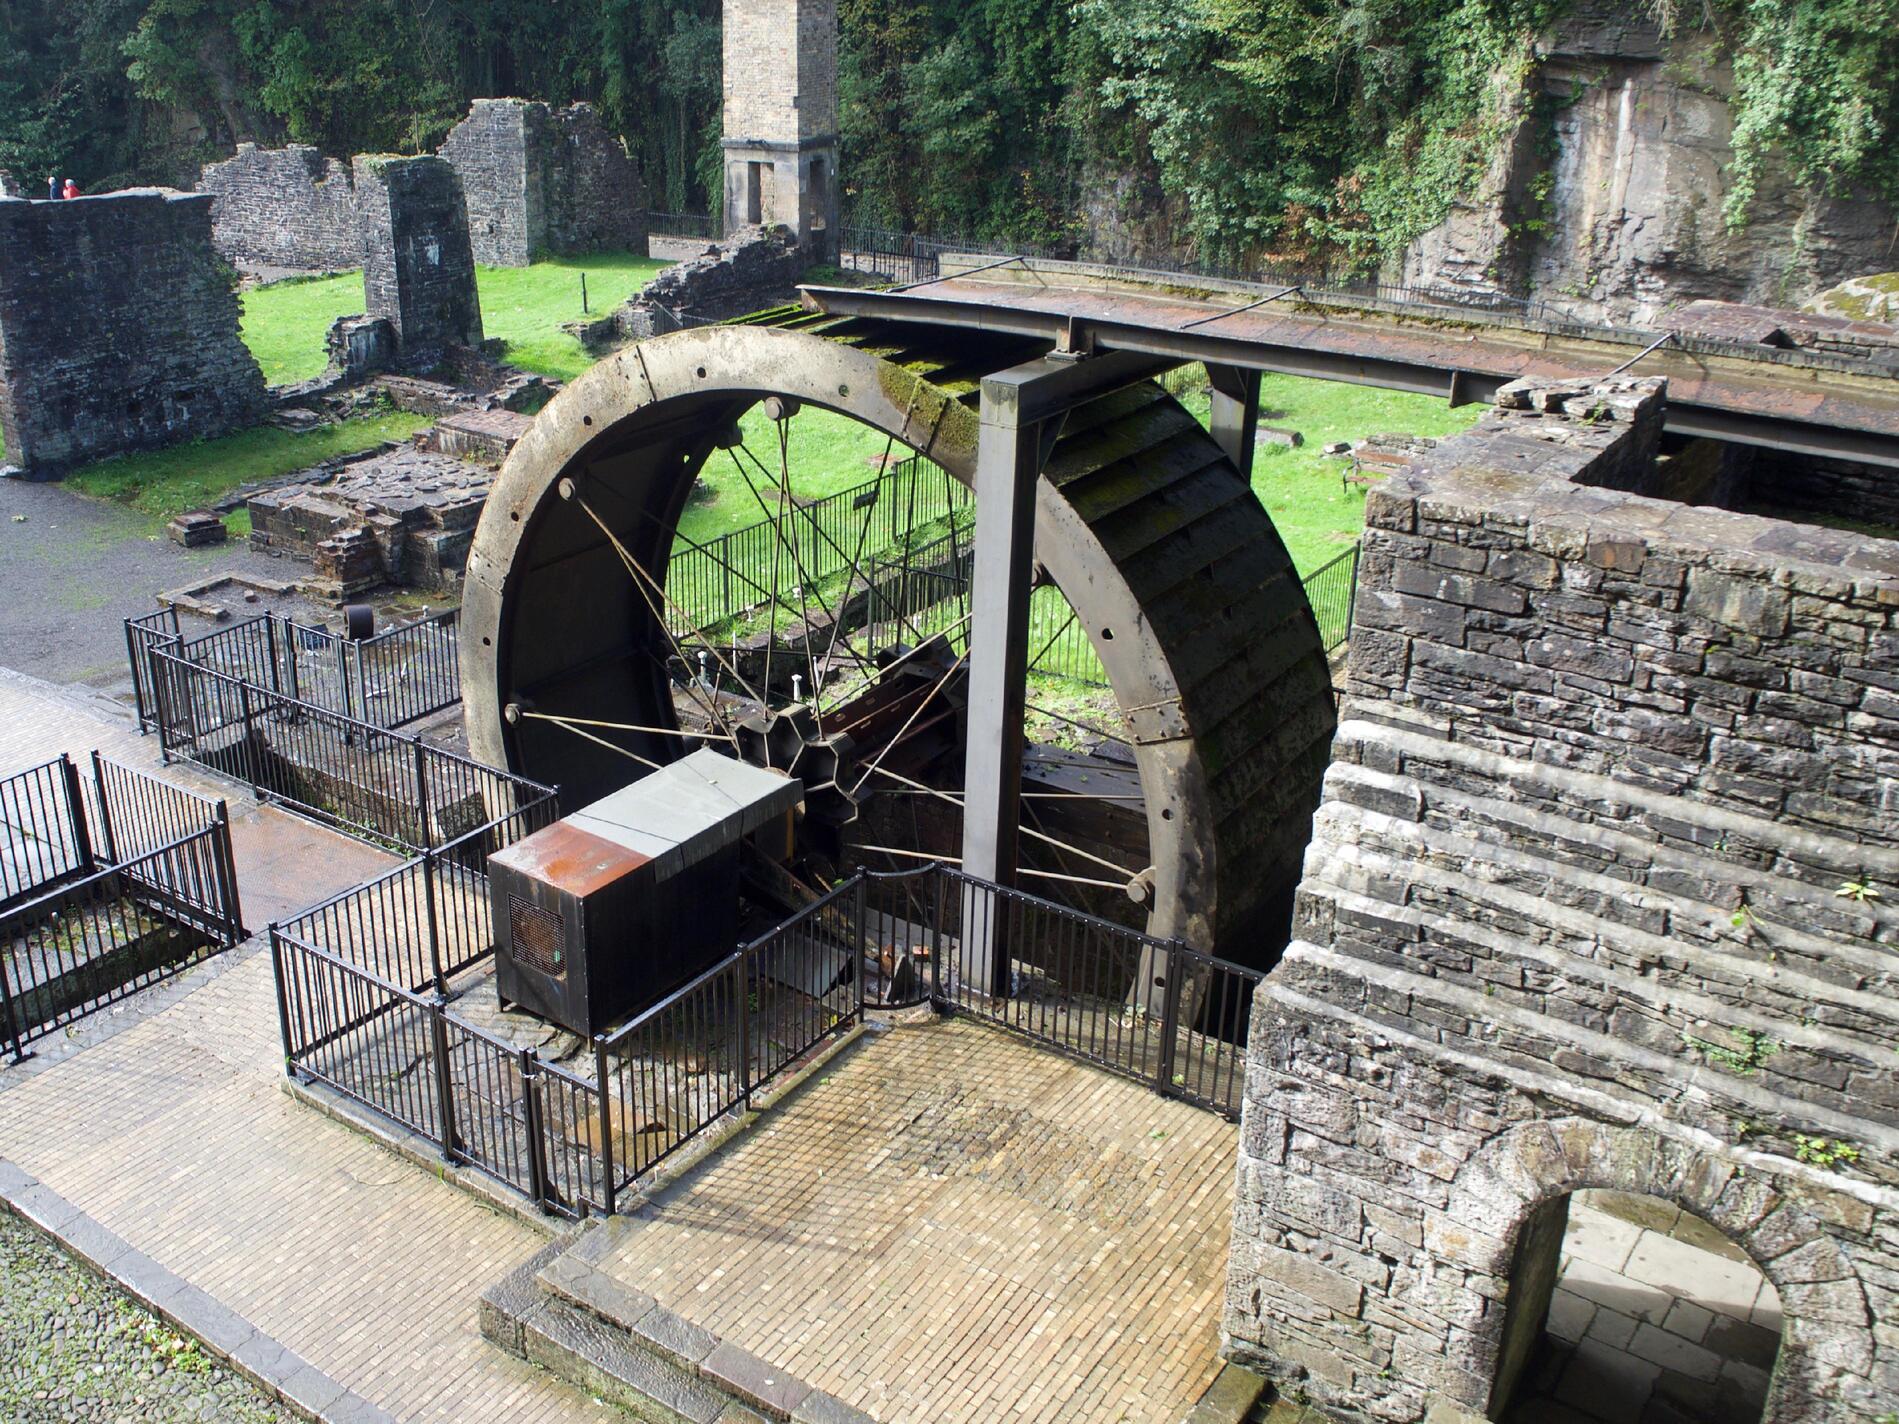 Looking down towards a waterwheel, with metal spokes and a box coming off the axle.